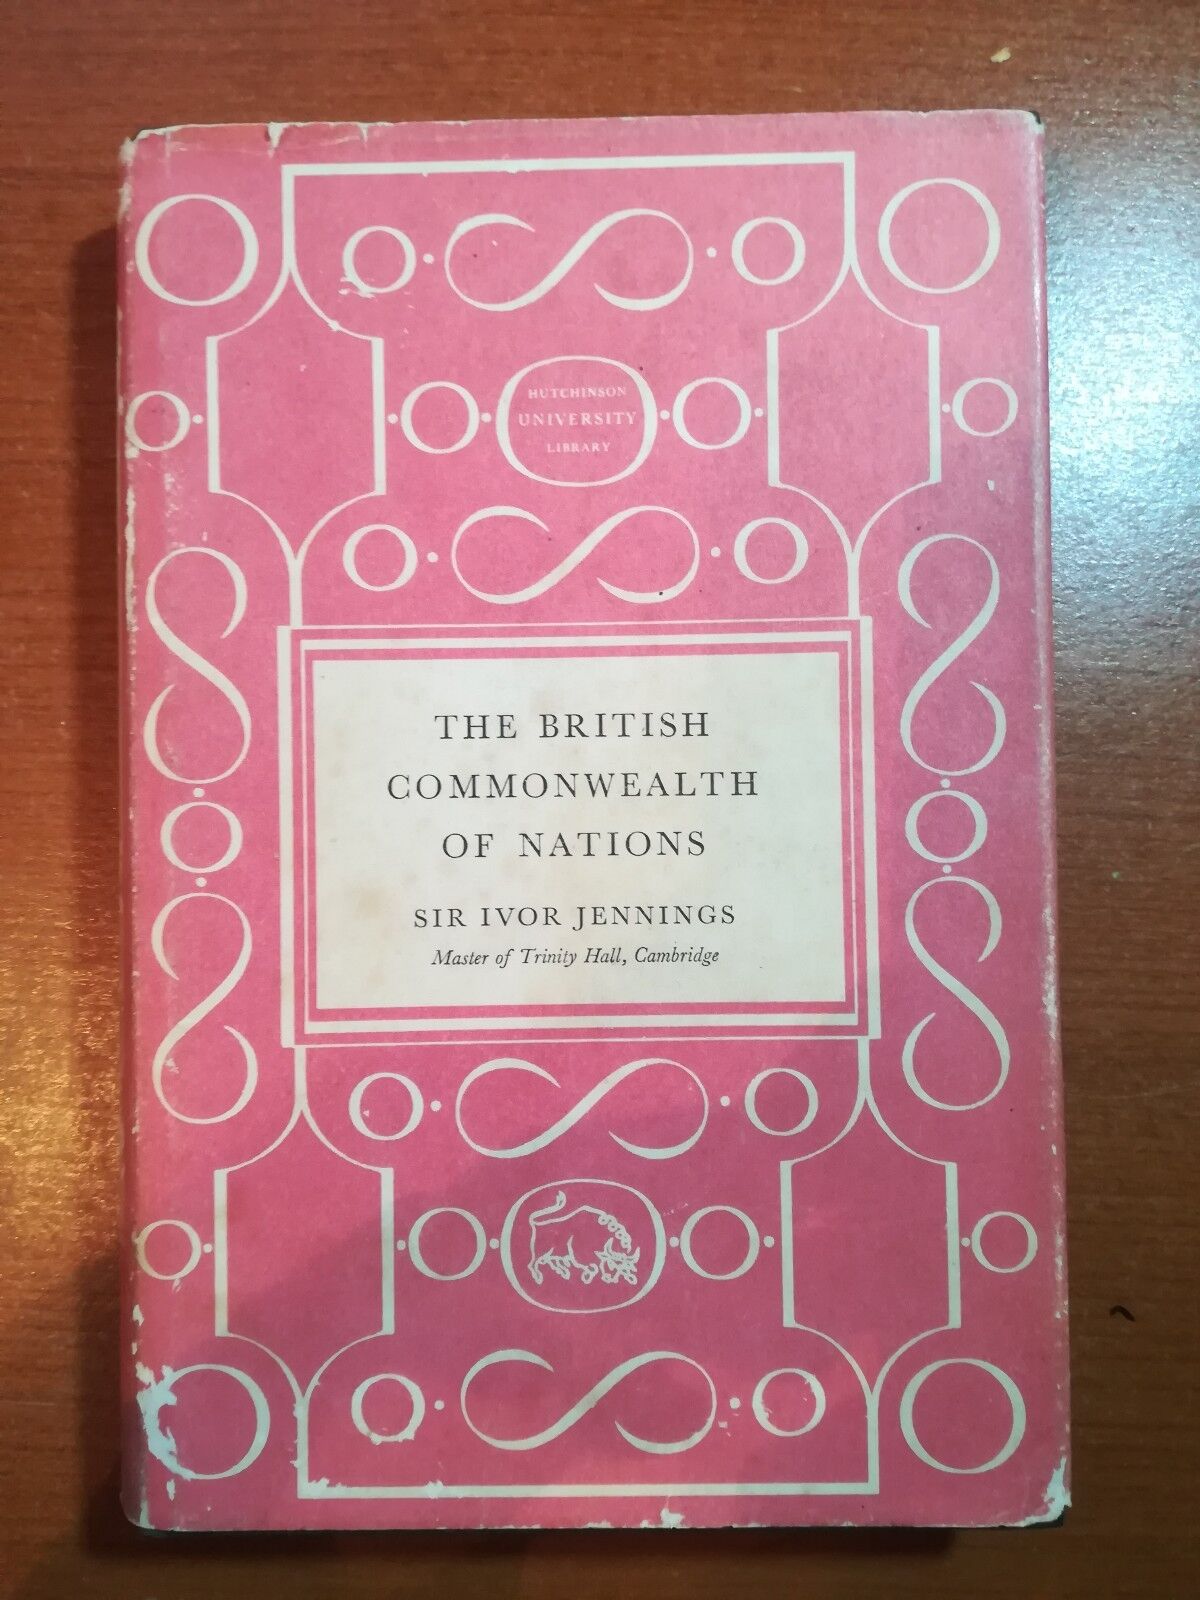 The british commonwealth of nations - I.Jennings - H. university Library -1961-M